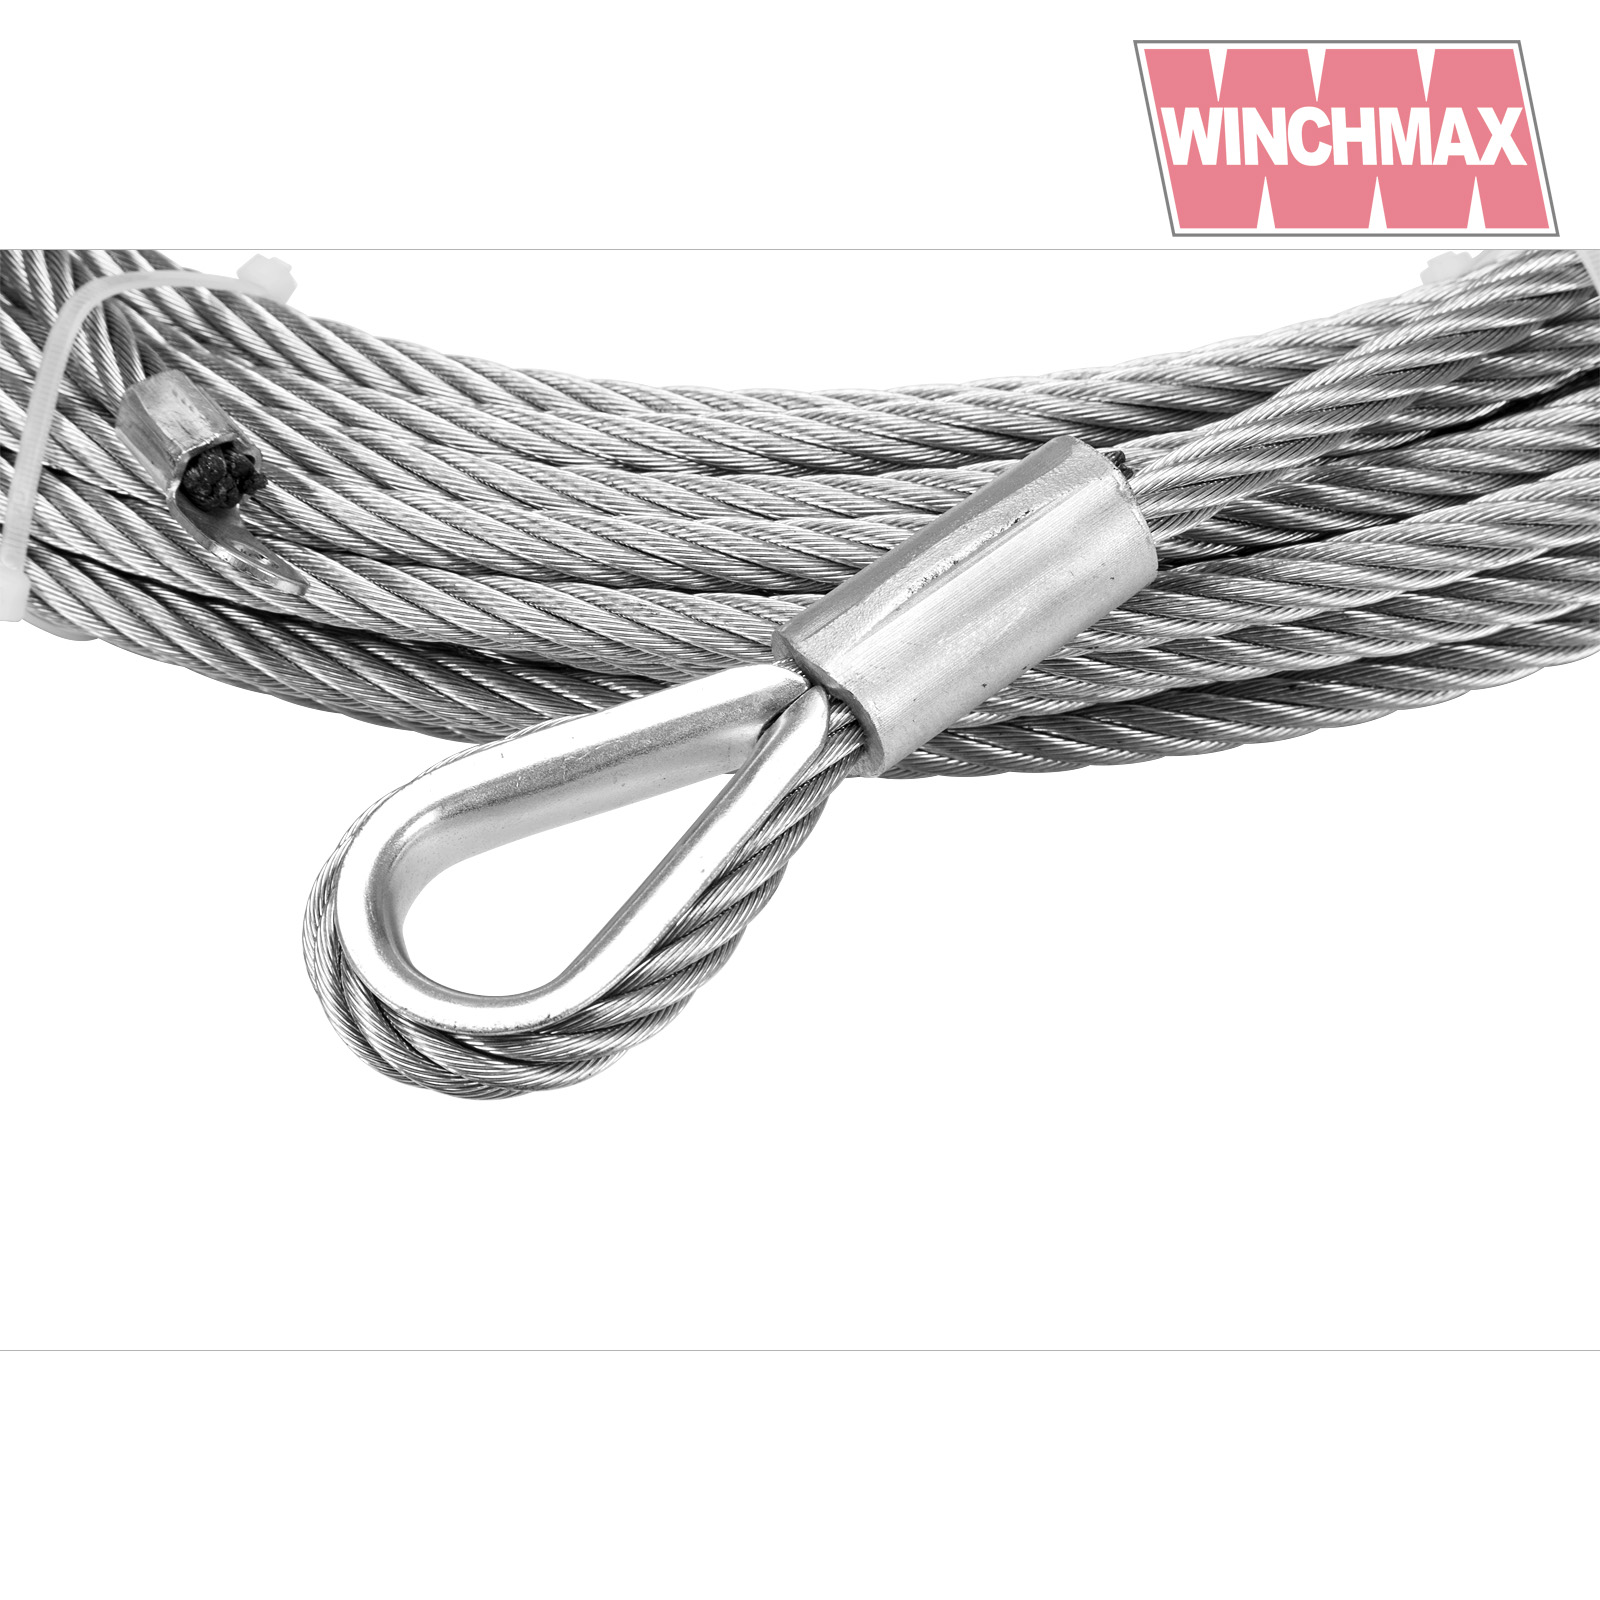 Winchmax Winch Cable Wire Rope 26m x 12 mm suitable for winches up to 17,500lb 